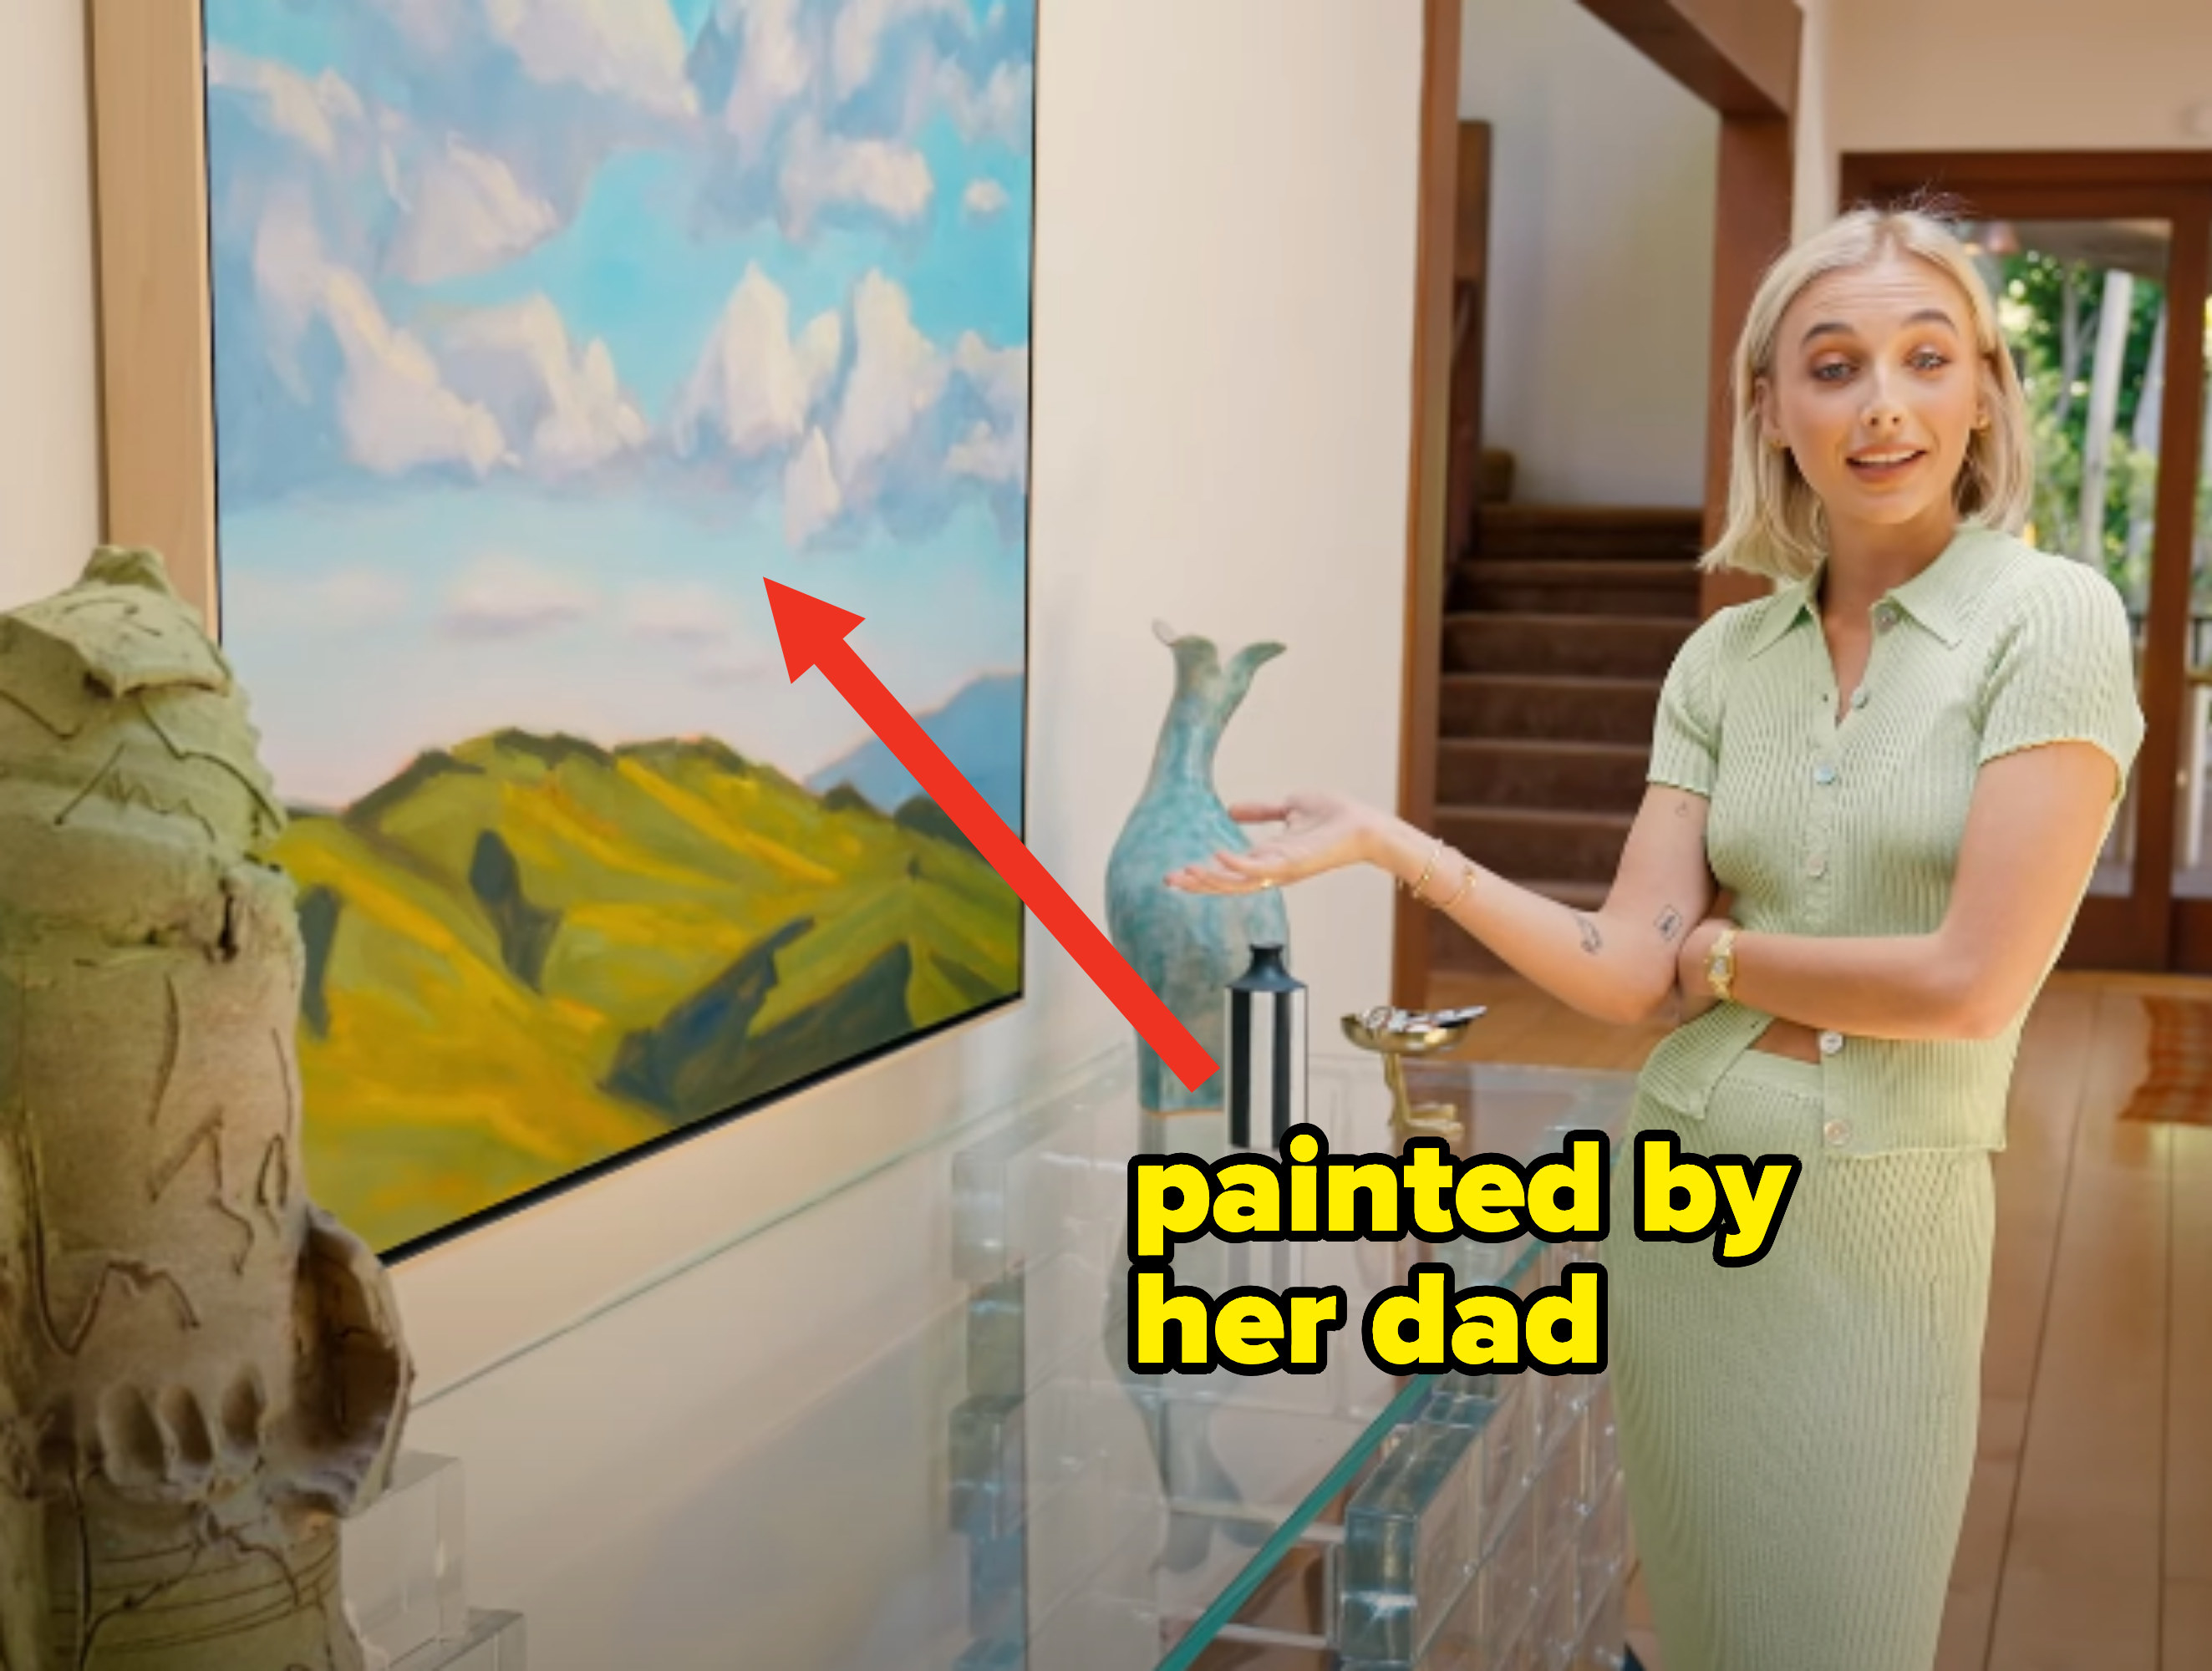 Emma showing a painting by her dad